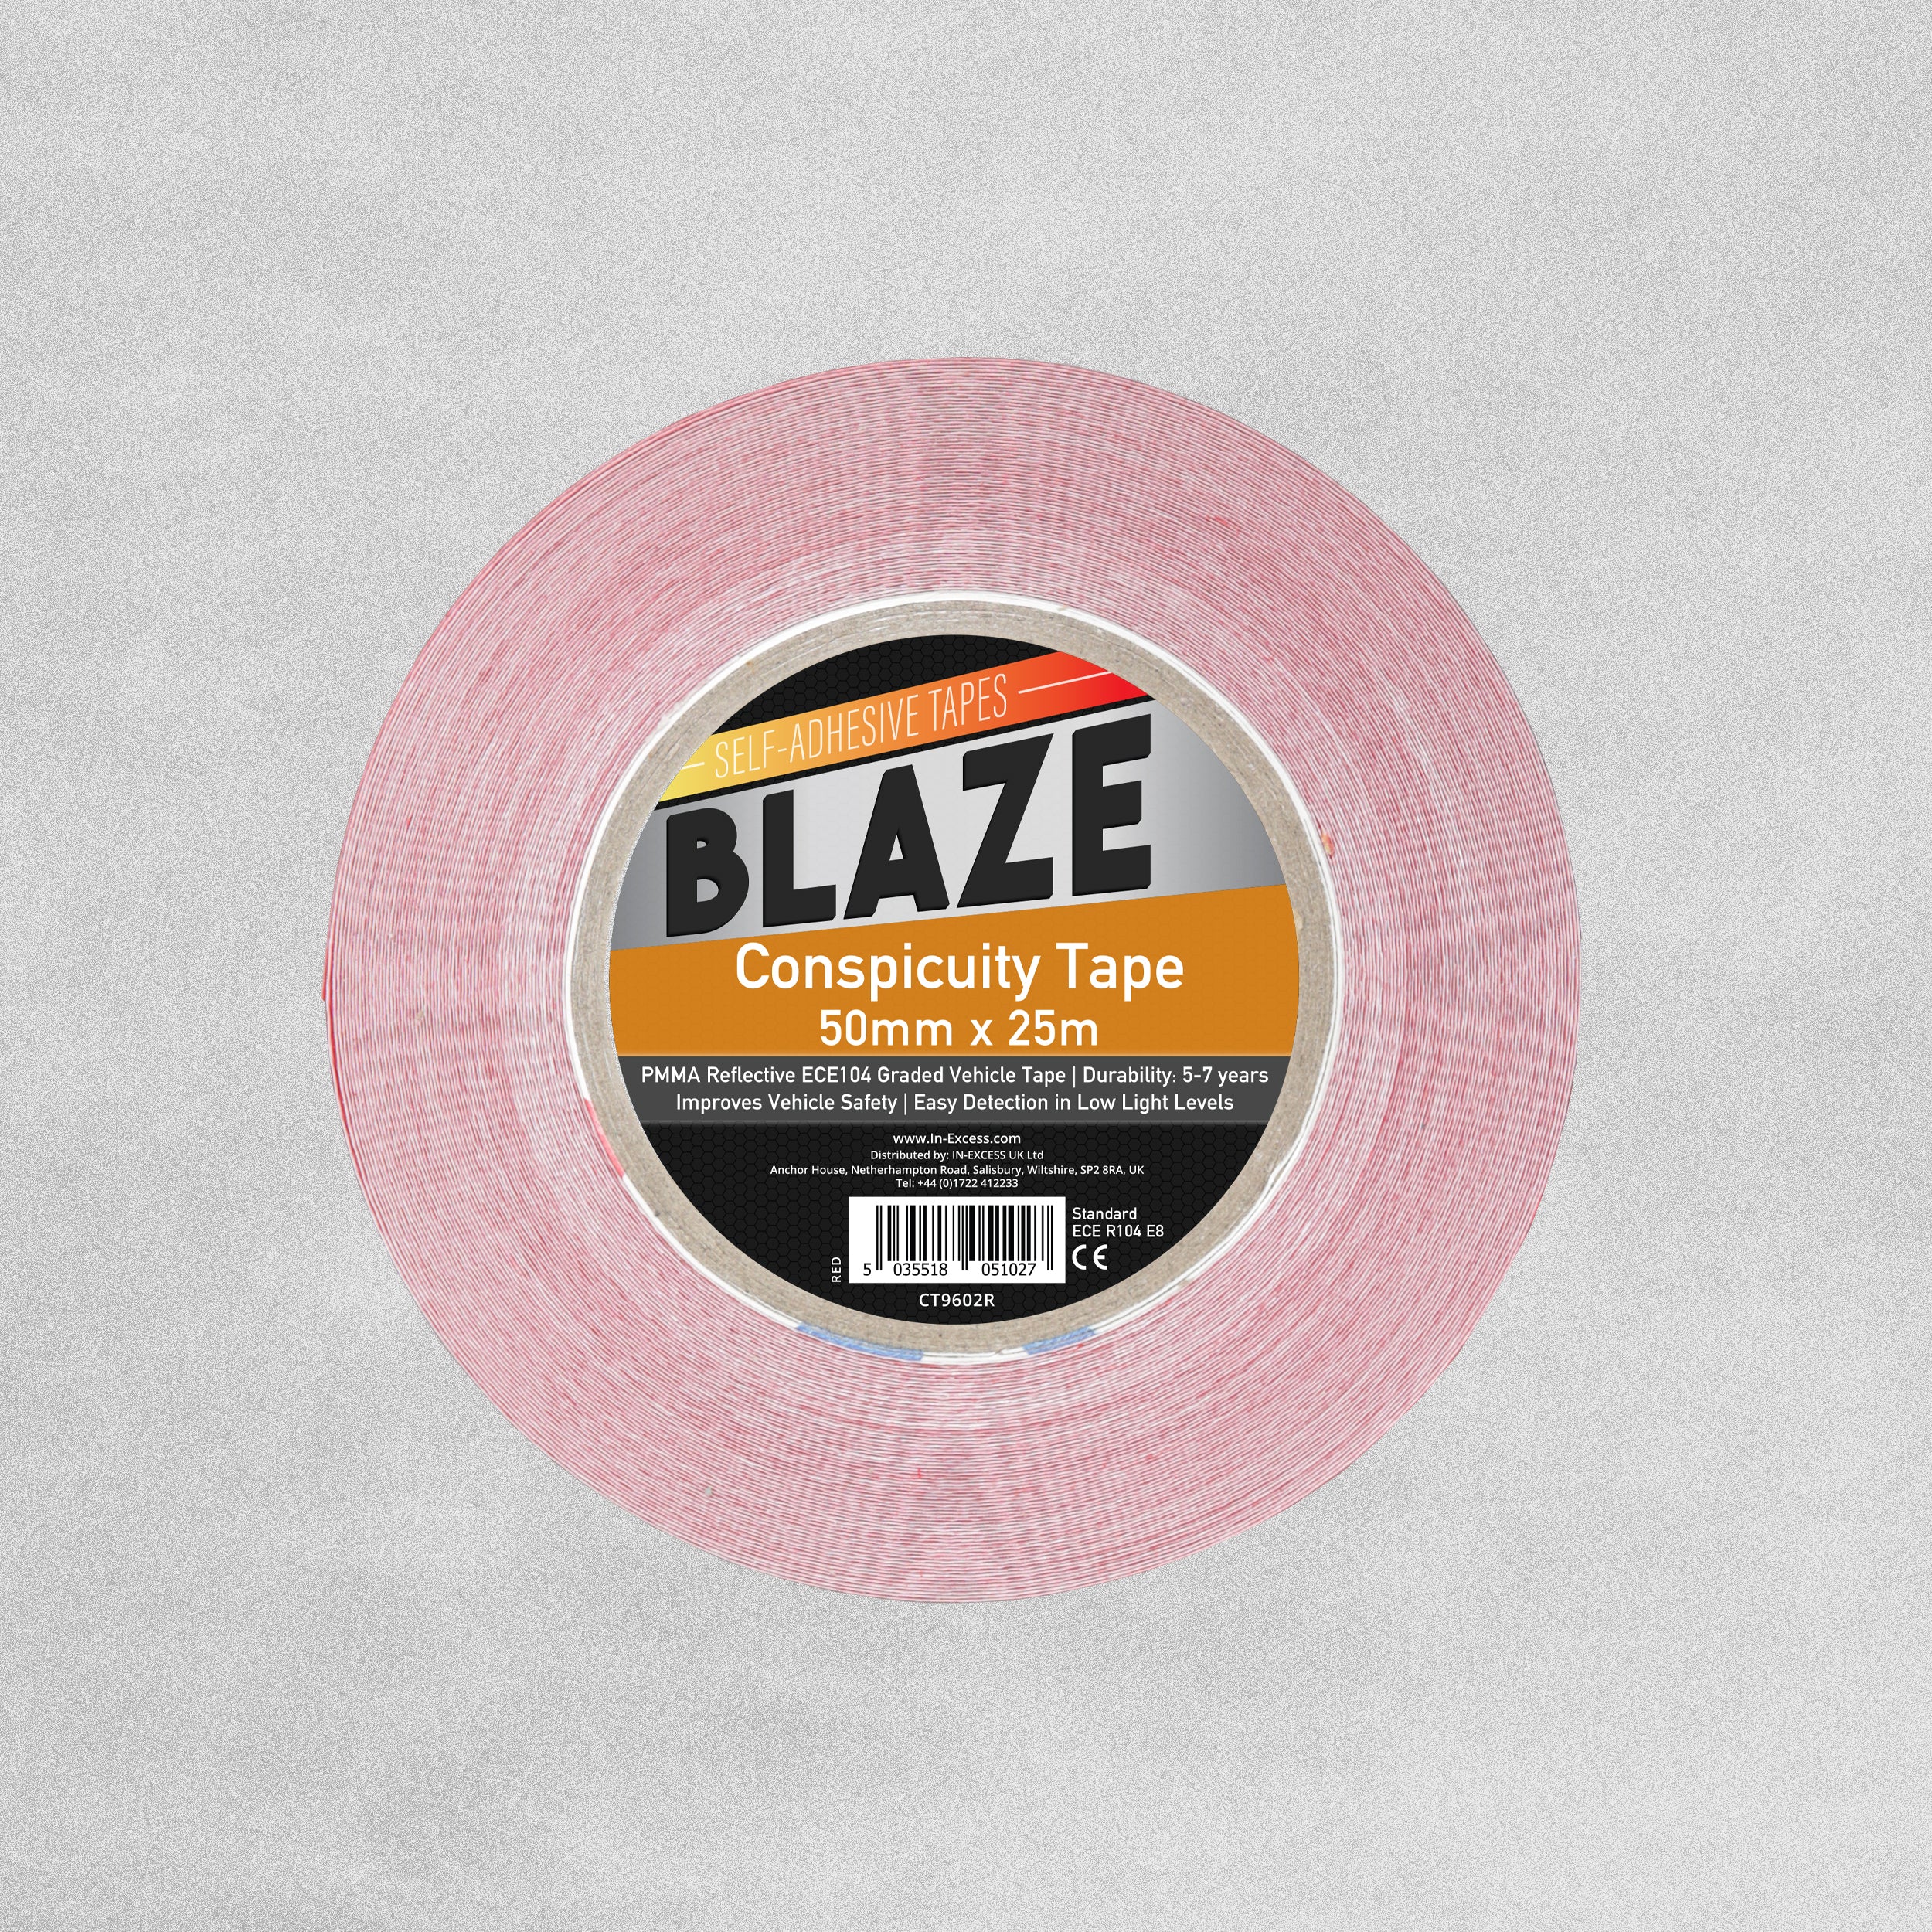 Blaze Vehicle Conspicuity Tape 50mm x 25m - Red